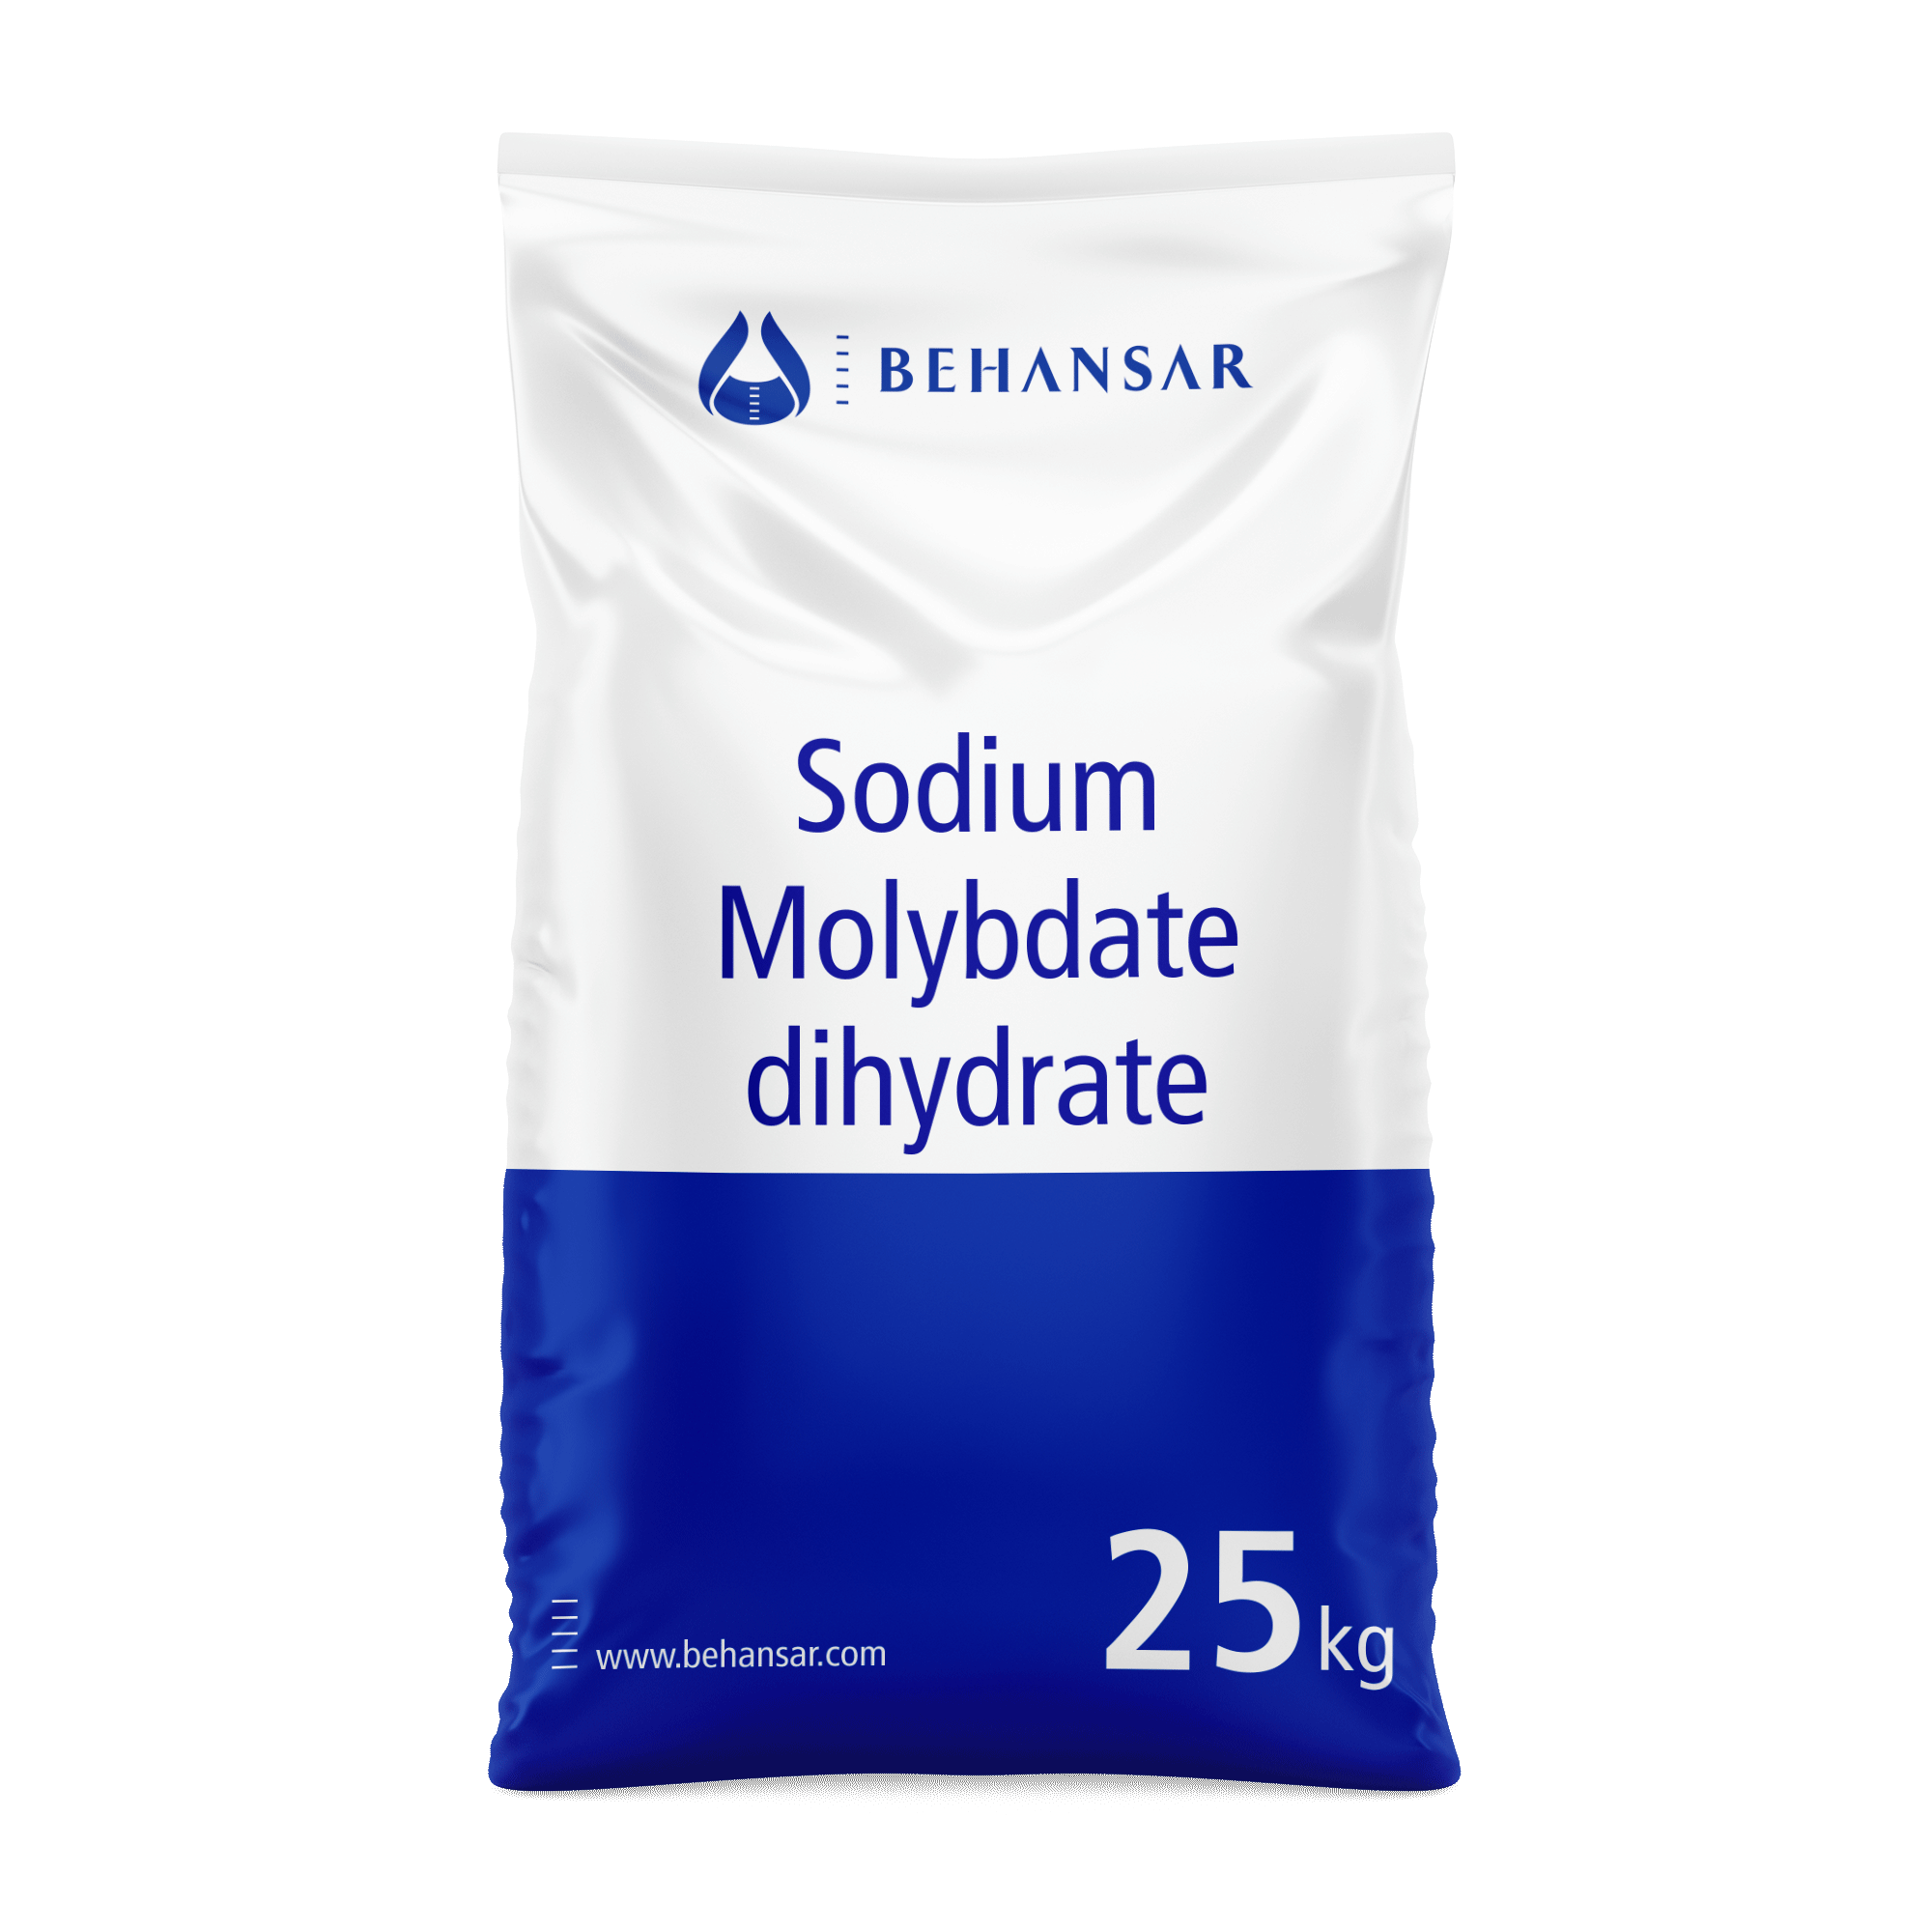 sodium Molybdate dihydrate is one of the products of Behansar Co